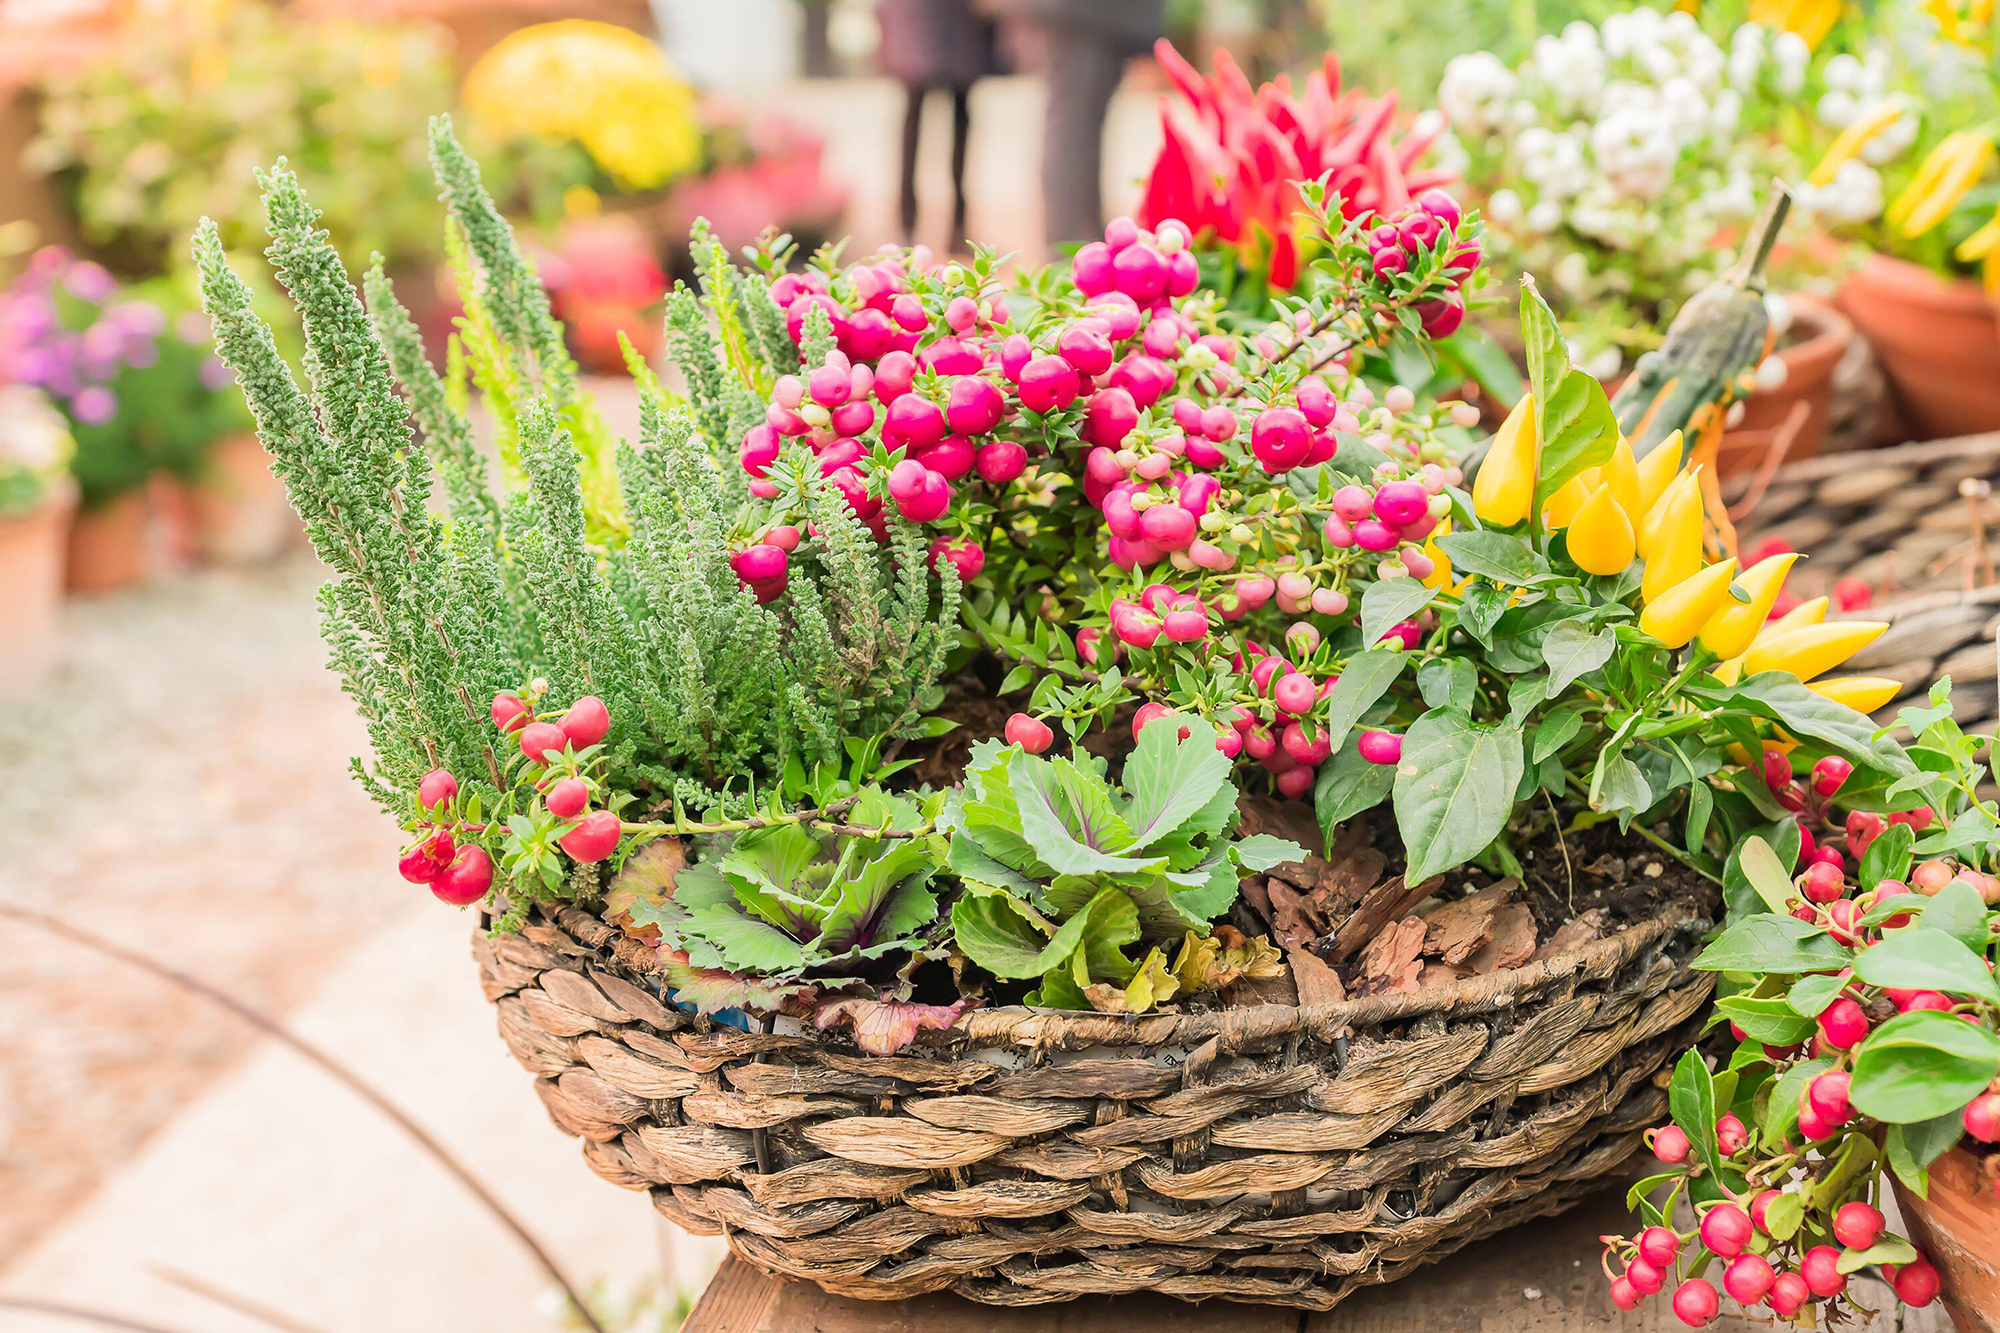 Image of Terracotta hanging basket with colorful flowers